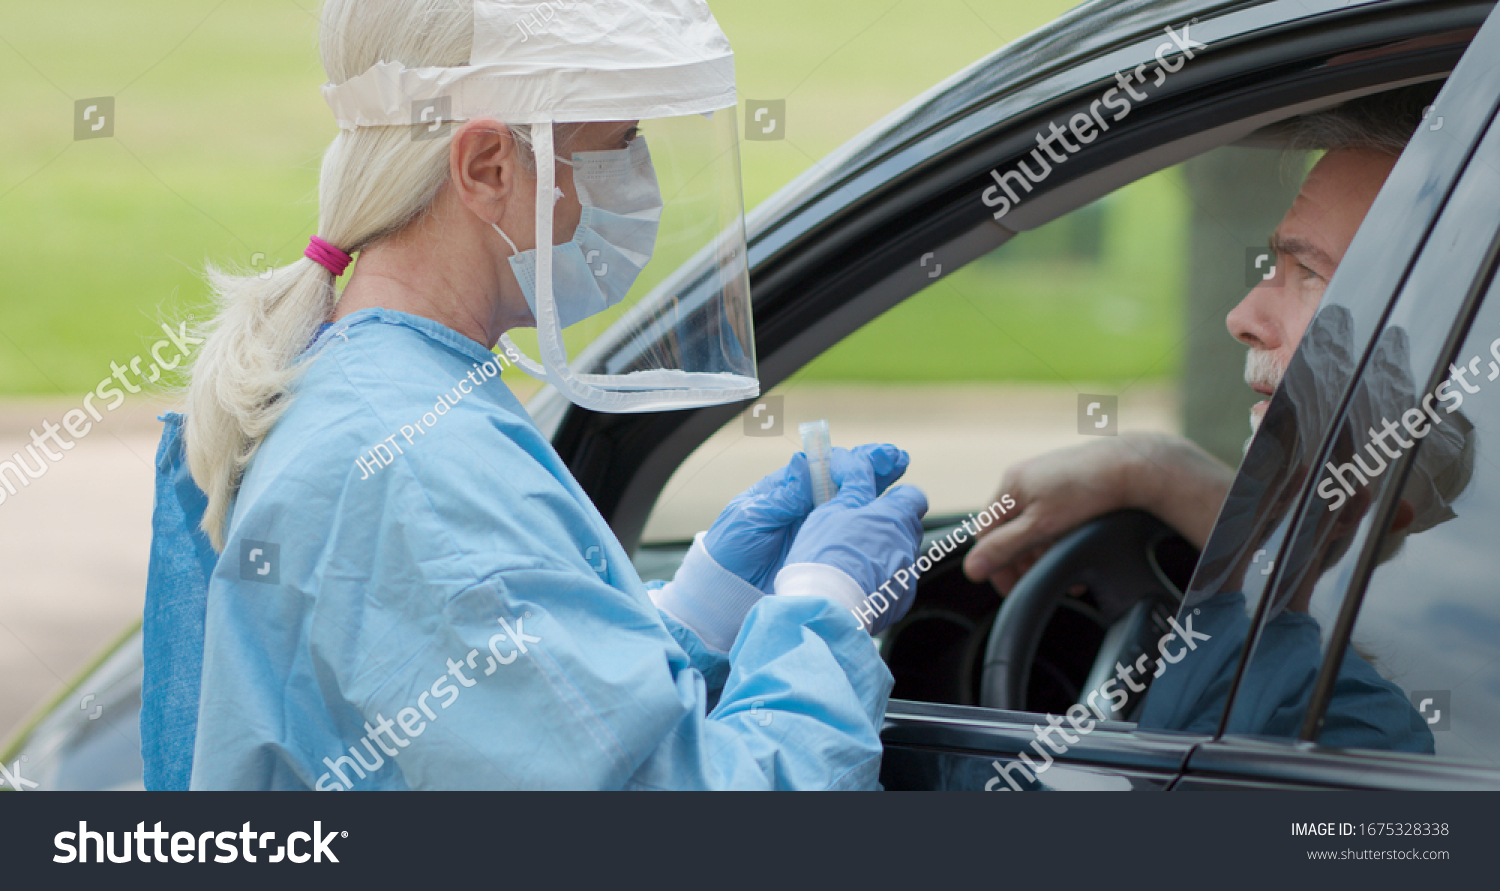 Dressed in full protective gear a healthcare worker collects a sample from a mature man sitting inside his car as part of the operations of a coronavirus mobile testing unit. #1675328338